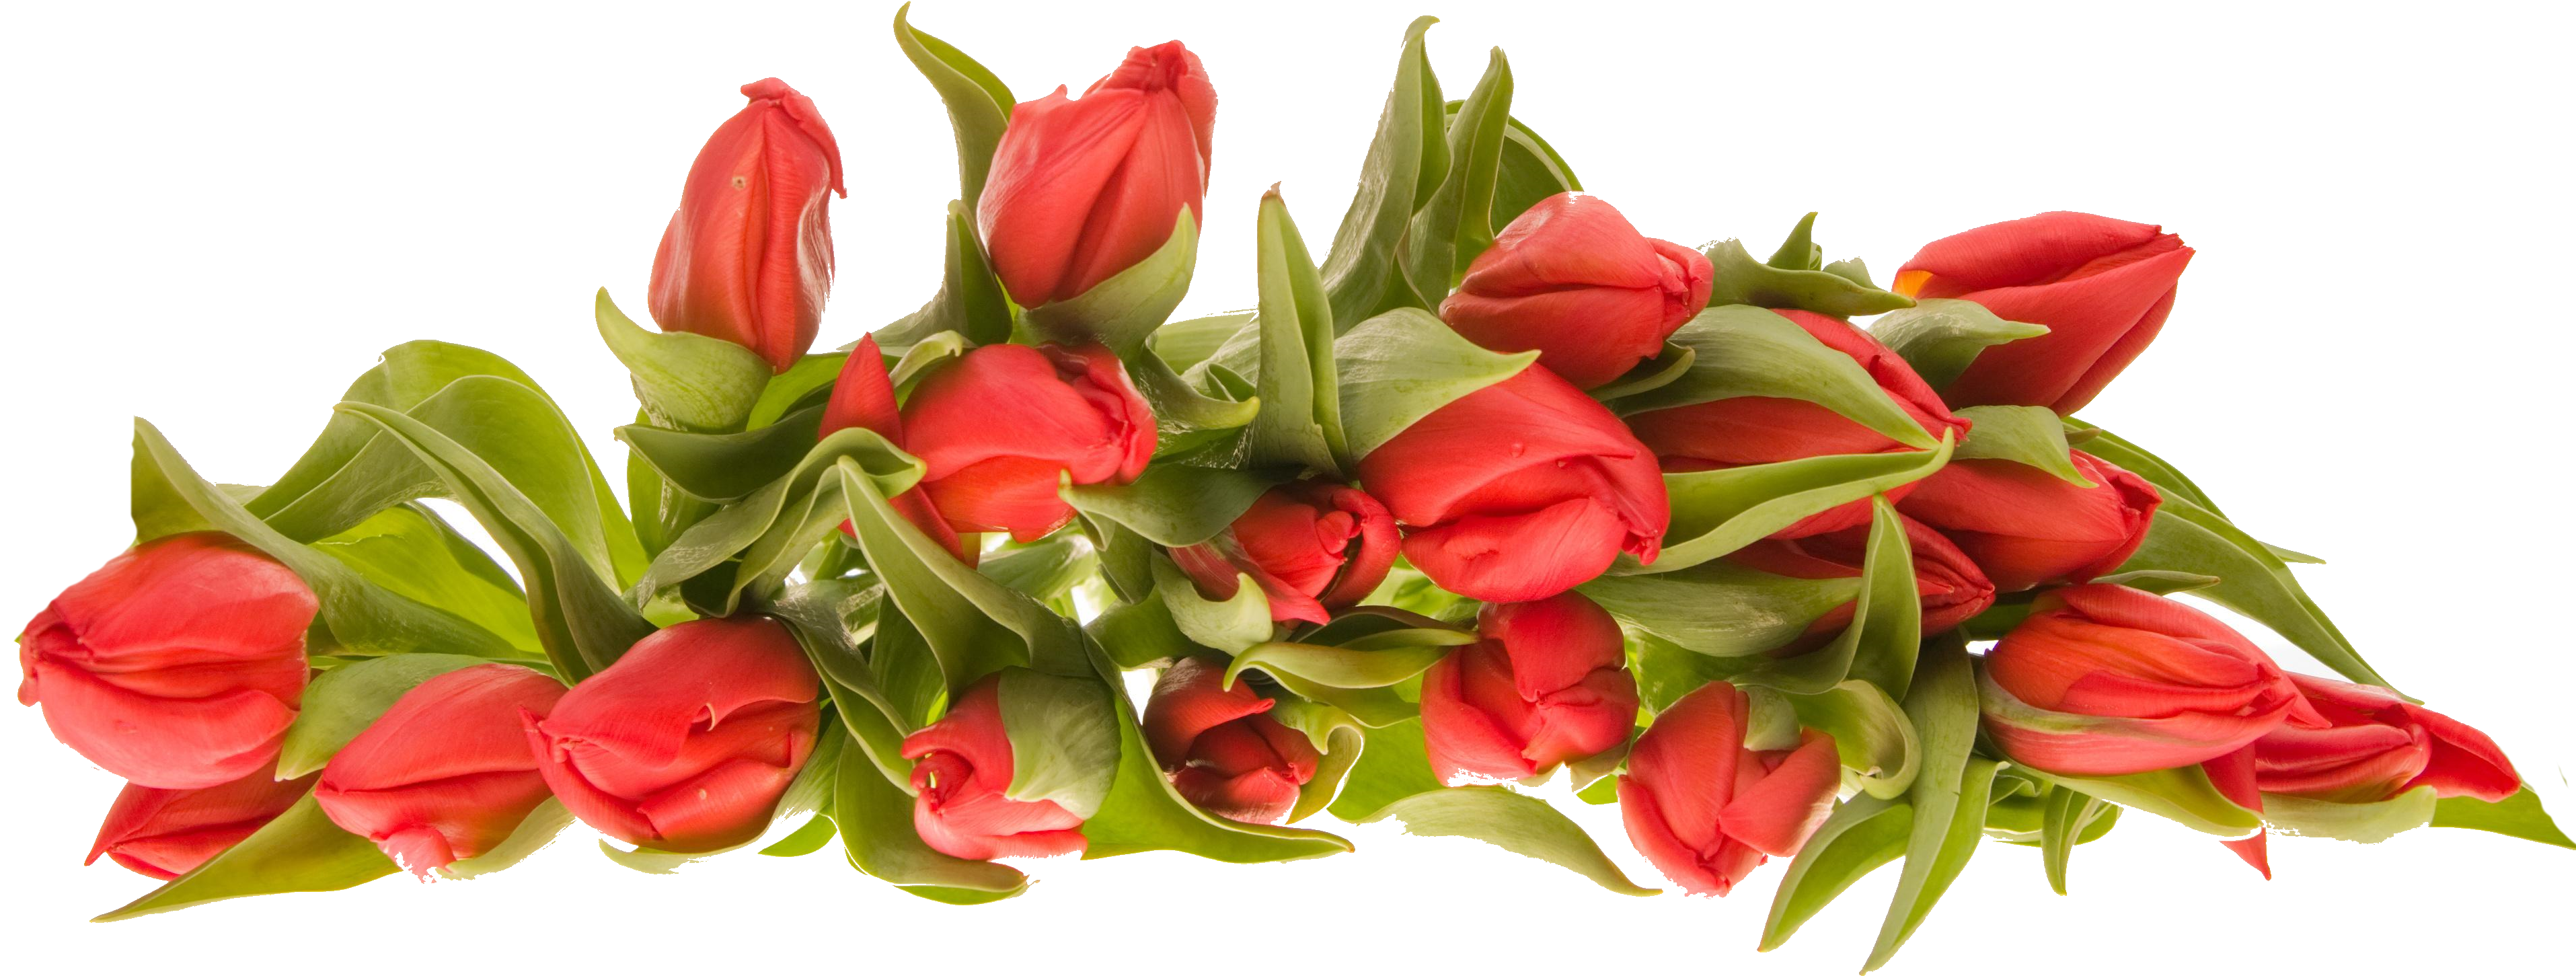 Free Bunch Of Flowers Png, Download Free Clip Art, Free Clip Art on